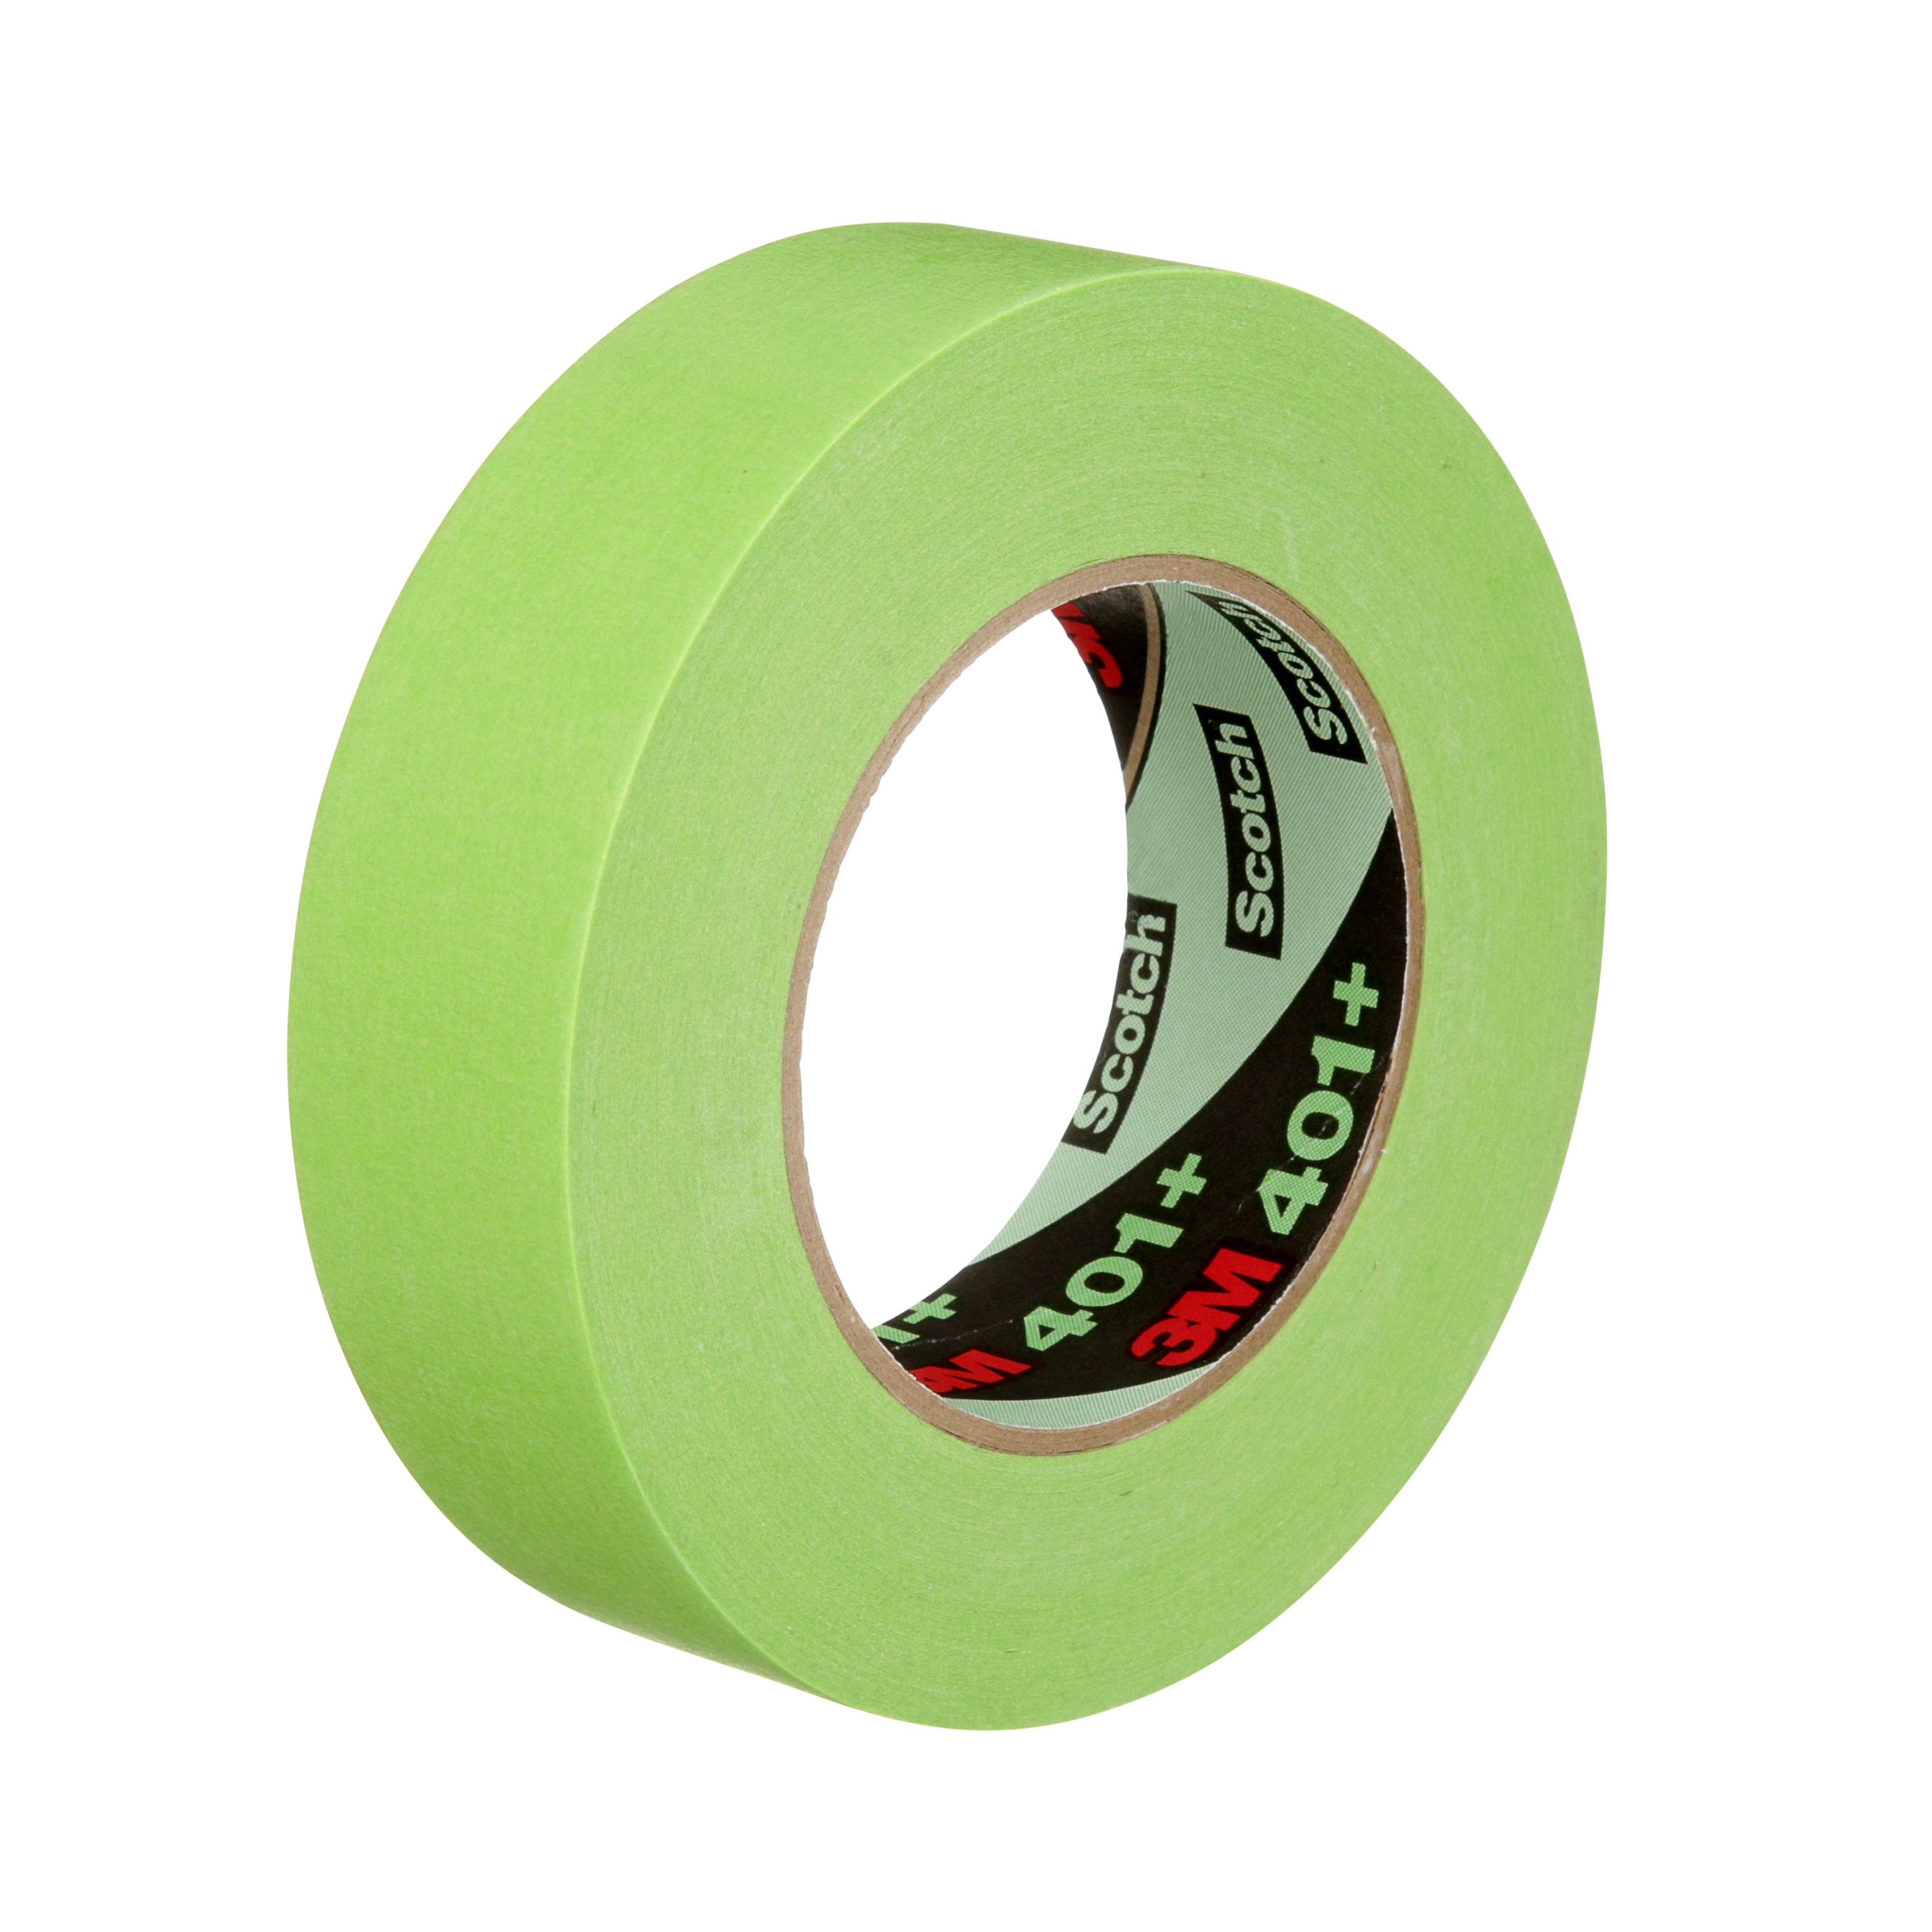 3M™ High Performance Green Masking Tape 401+, 1 in x 60 yd, 48 per case